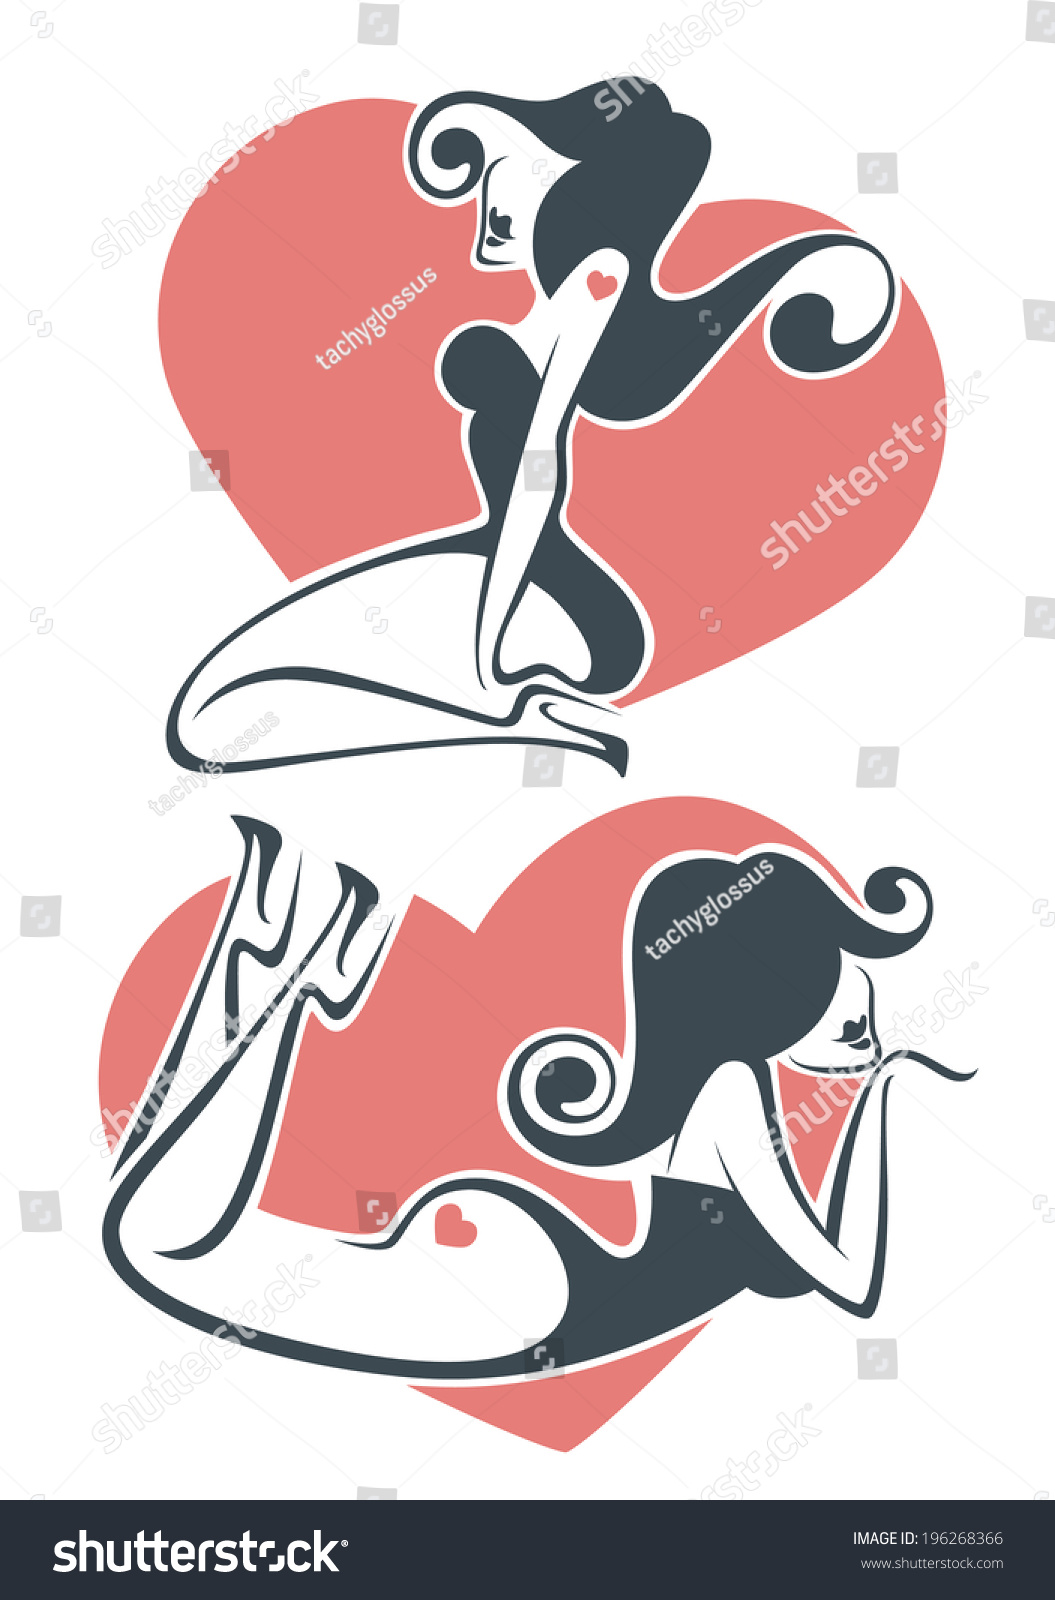 Sexy Pin Up Girl With Heart Background Stock Vector Illustration 196268366 Shutterstock